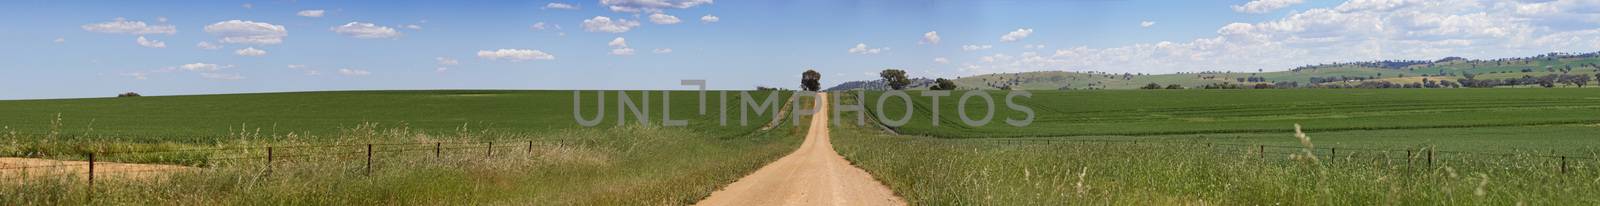 Miles of hilly dirt road carves up the fields of farmland in country NSW Australia